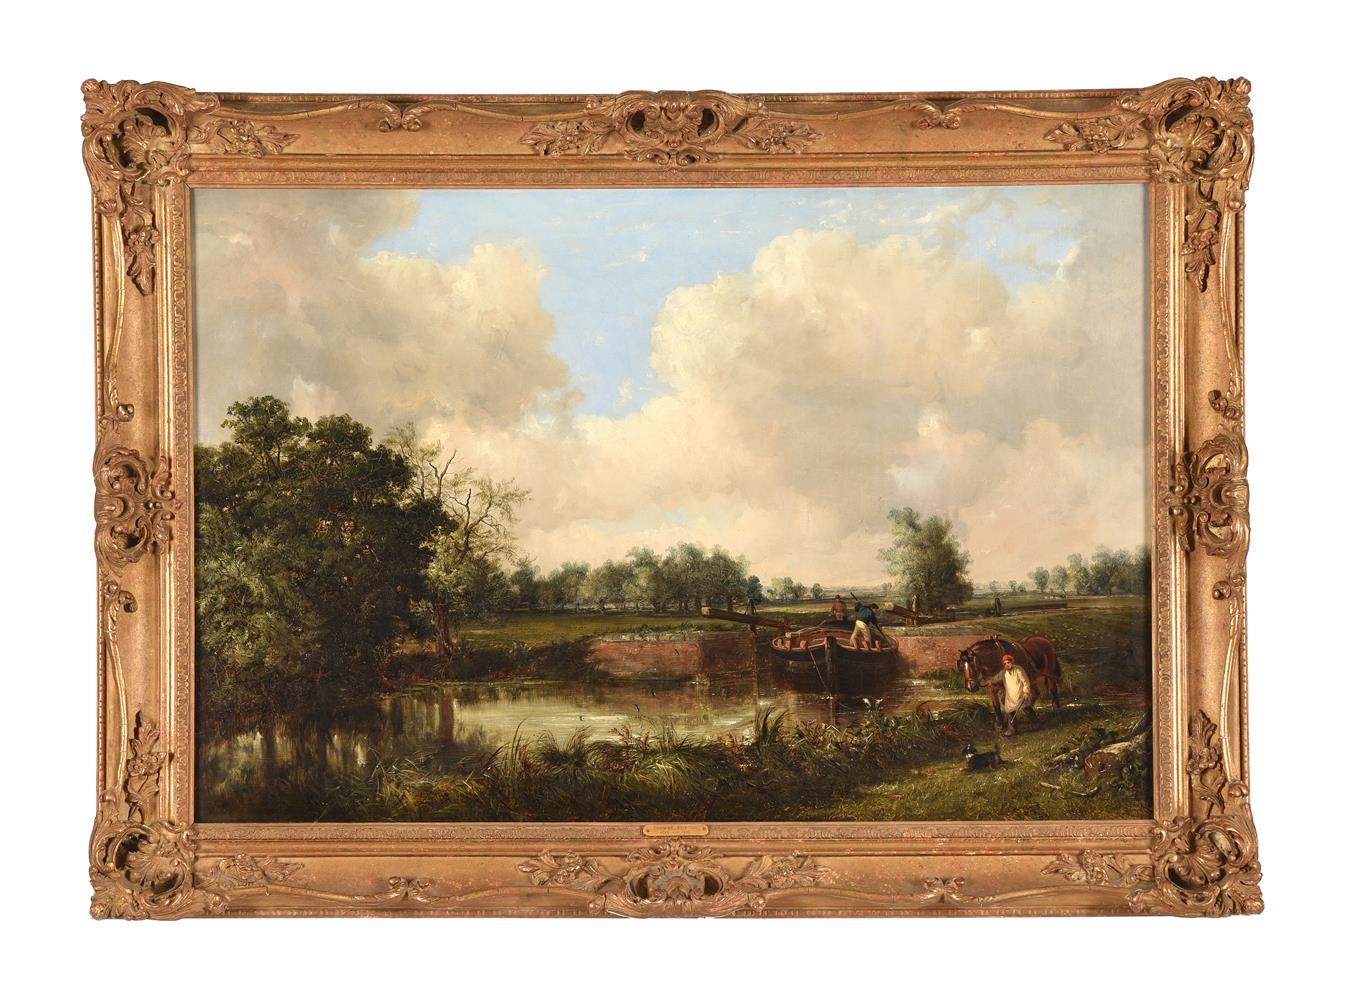 THOMAS SMYTHE (BRITISH 1825-1906), SUMMER LANDSCAPE WITH FIGURES ON A BARGE BY A LOCK - Image 2 of 3